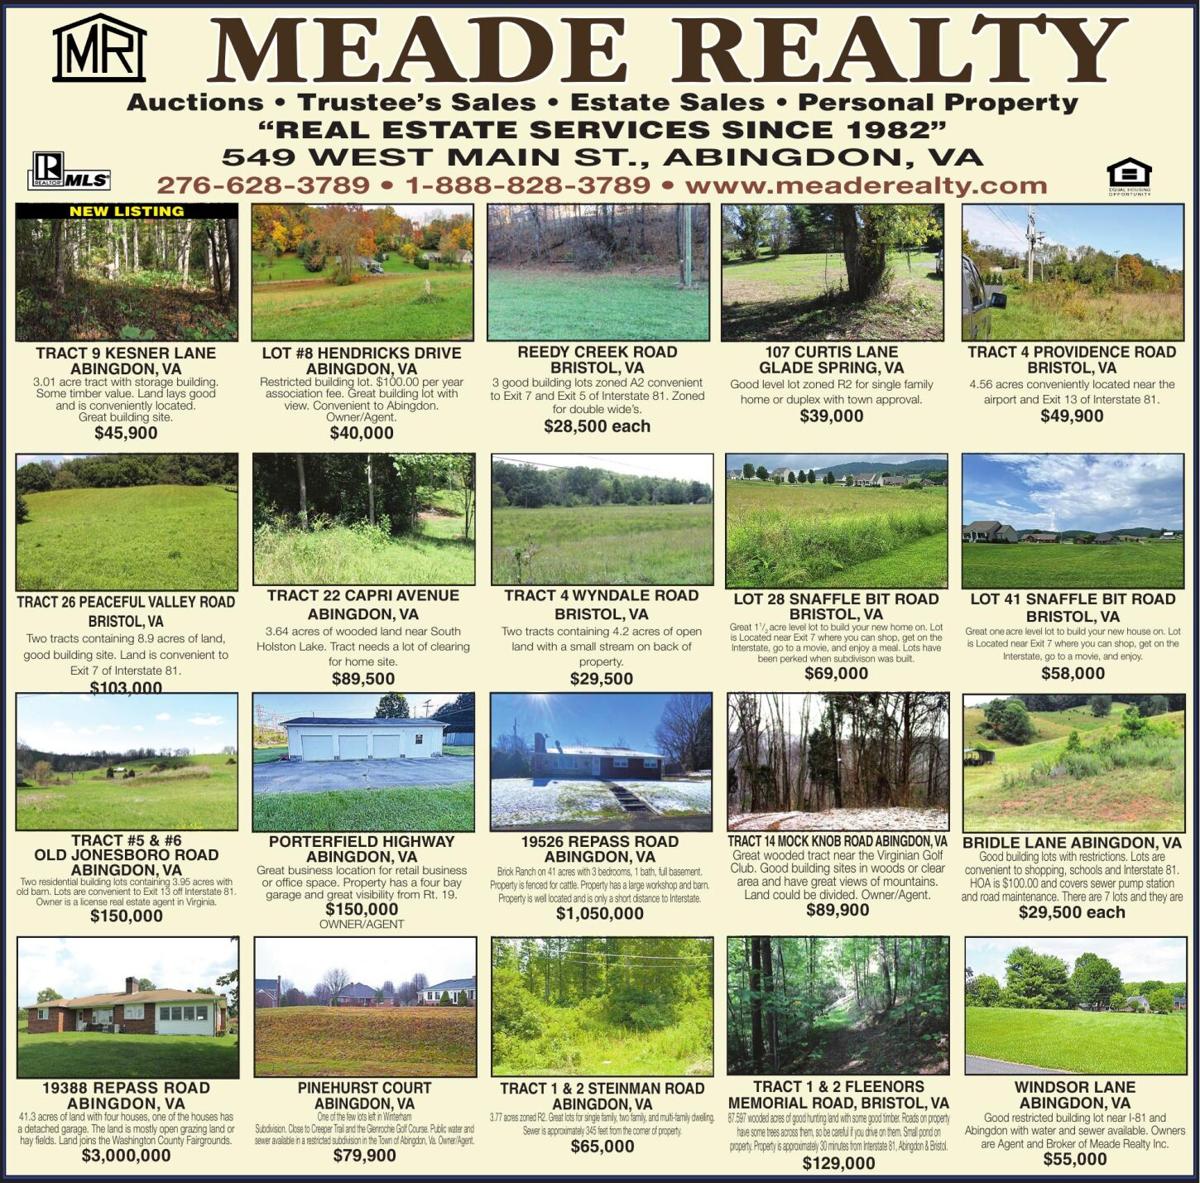 MEADE REALTY